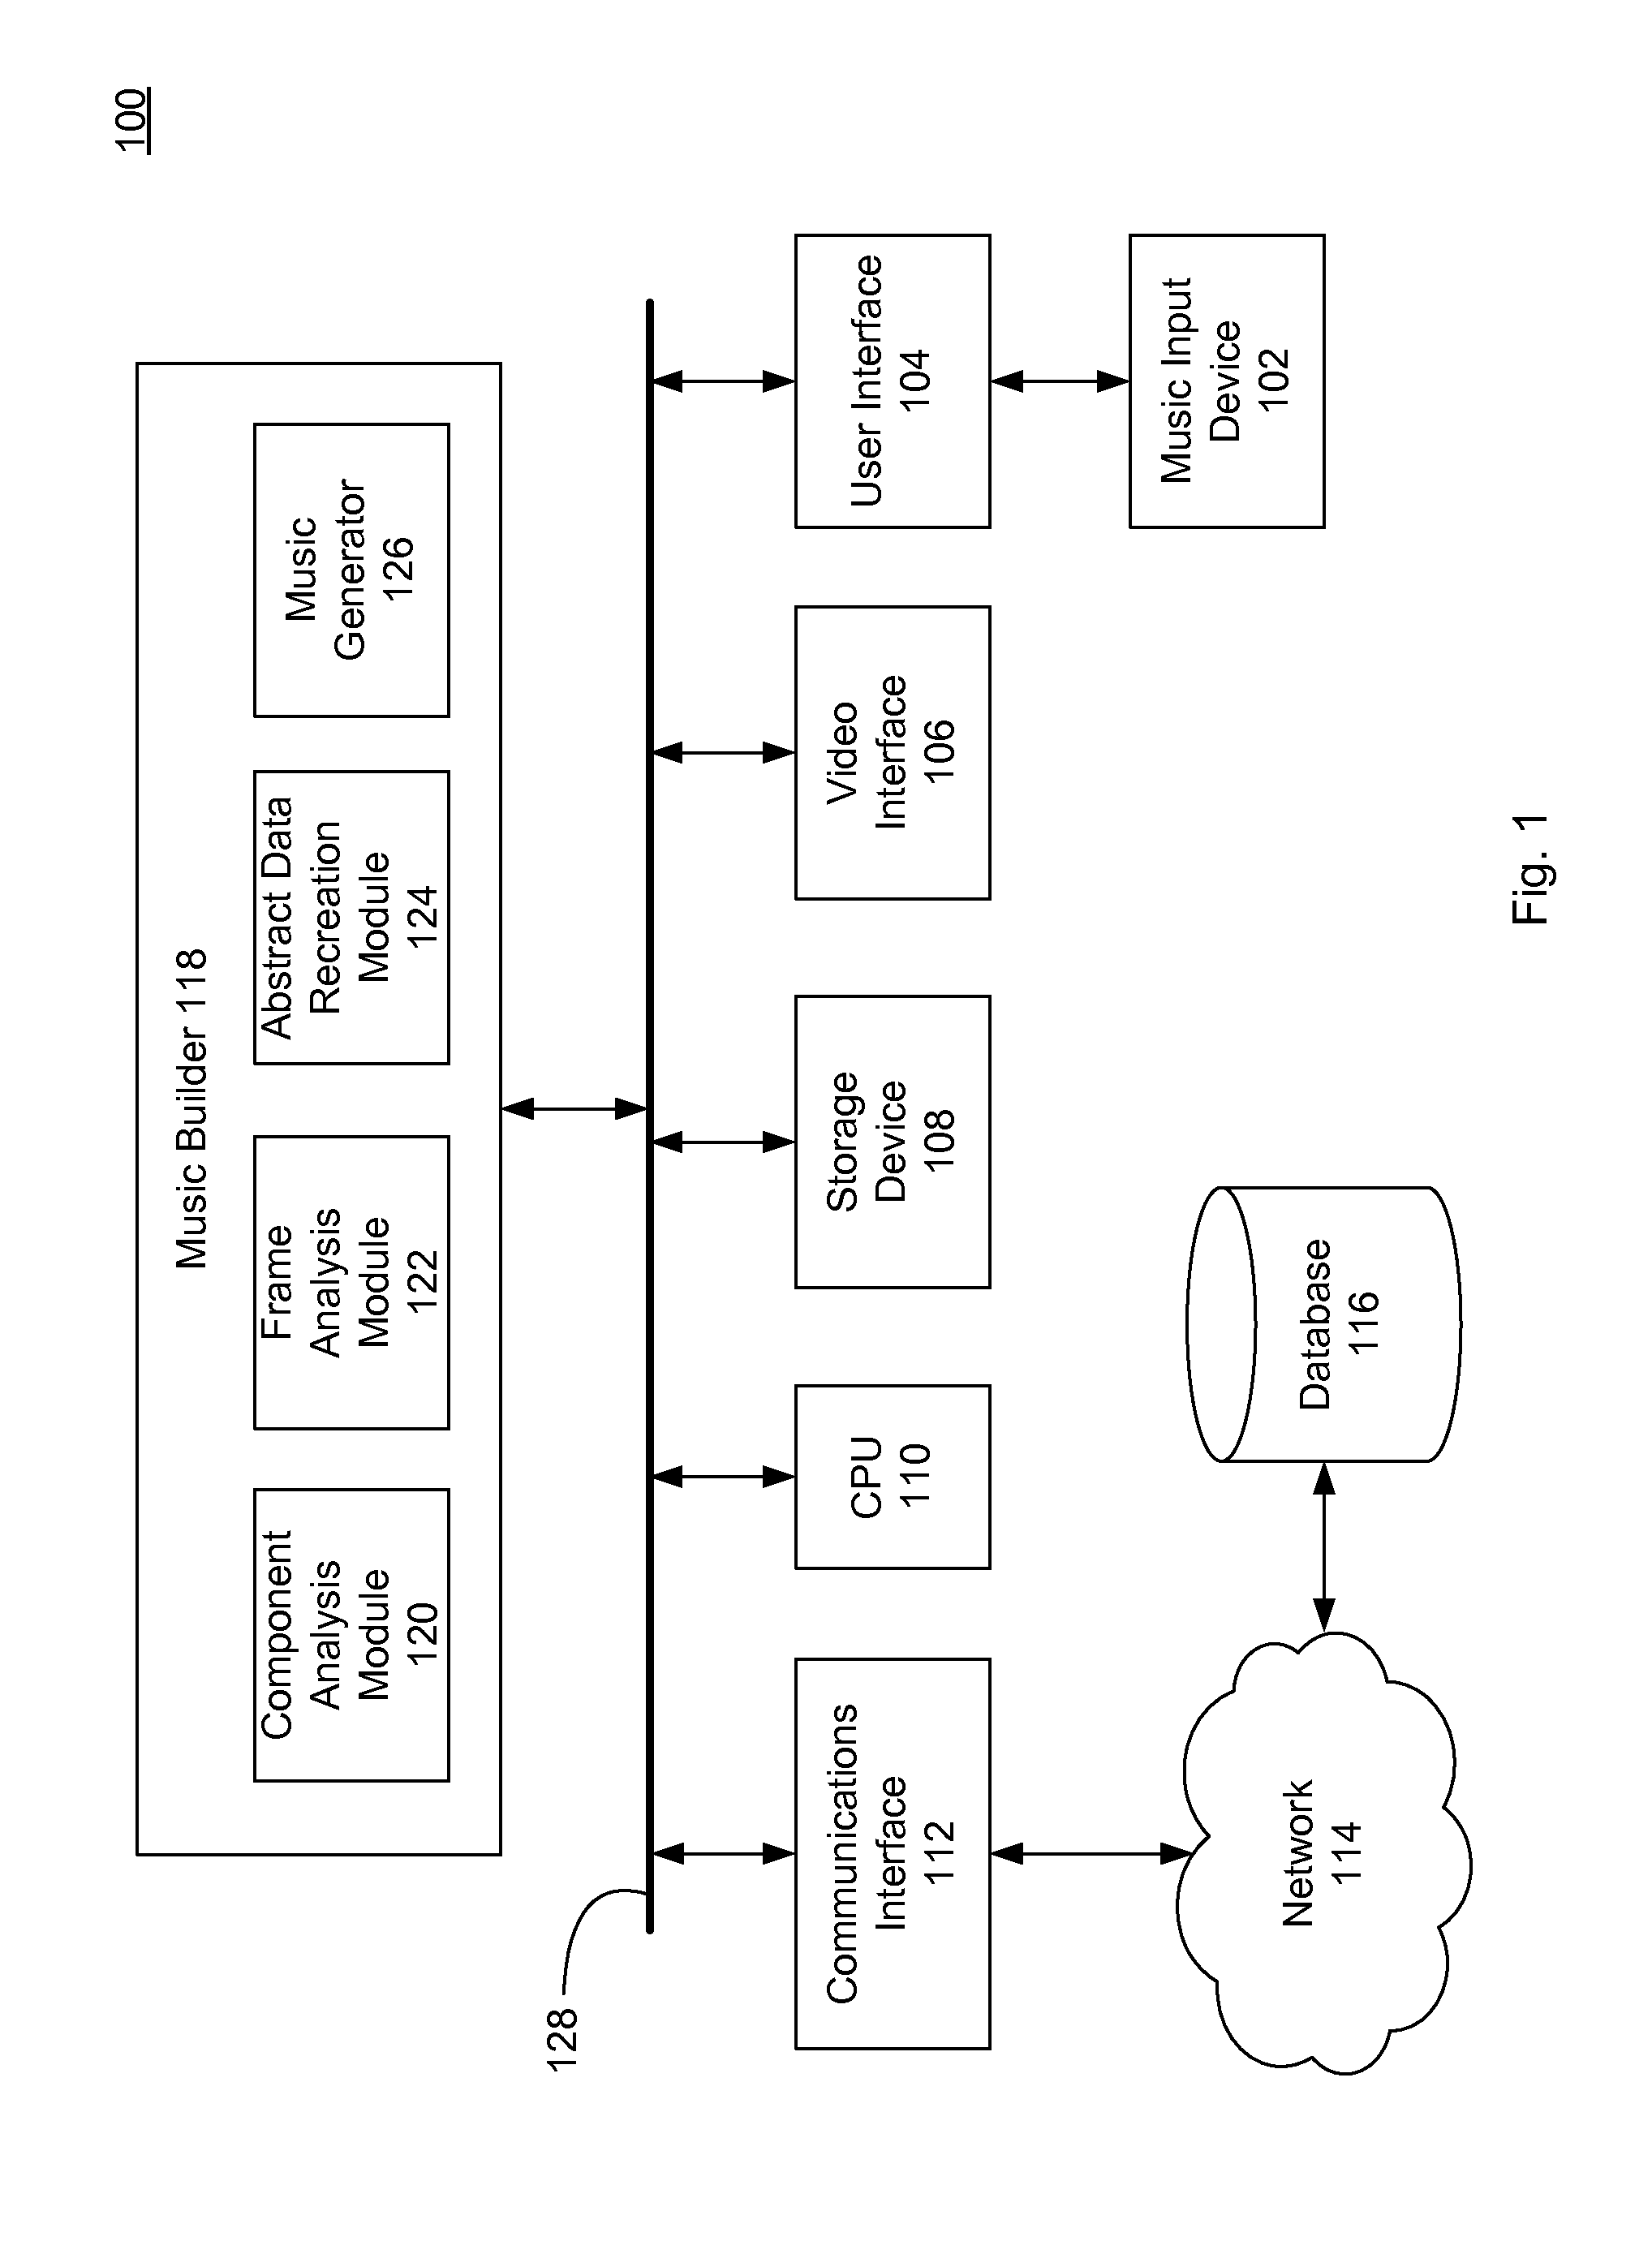 System and method for analysis and creation of music